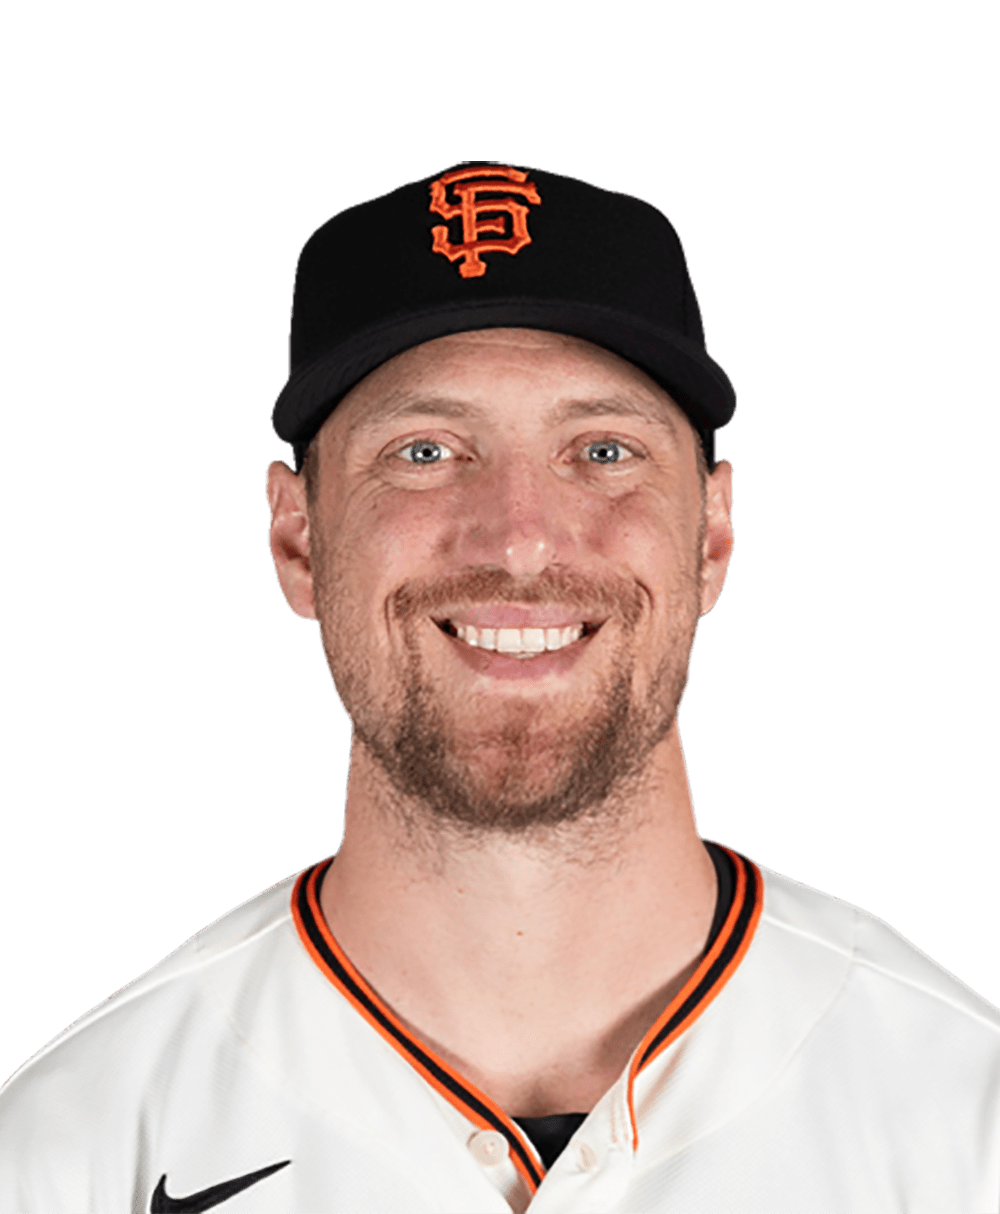 Giants designate outfielder Hunter Pence for assignment - The Boston Globe